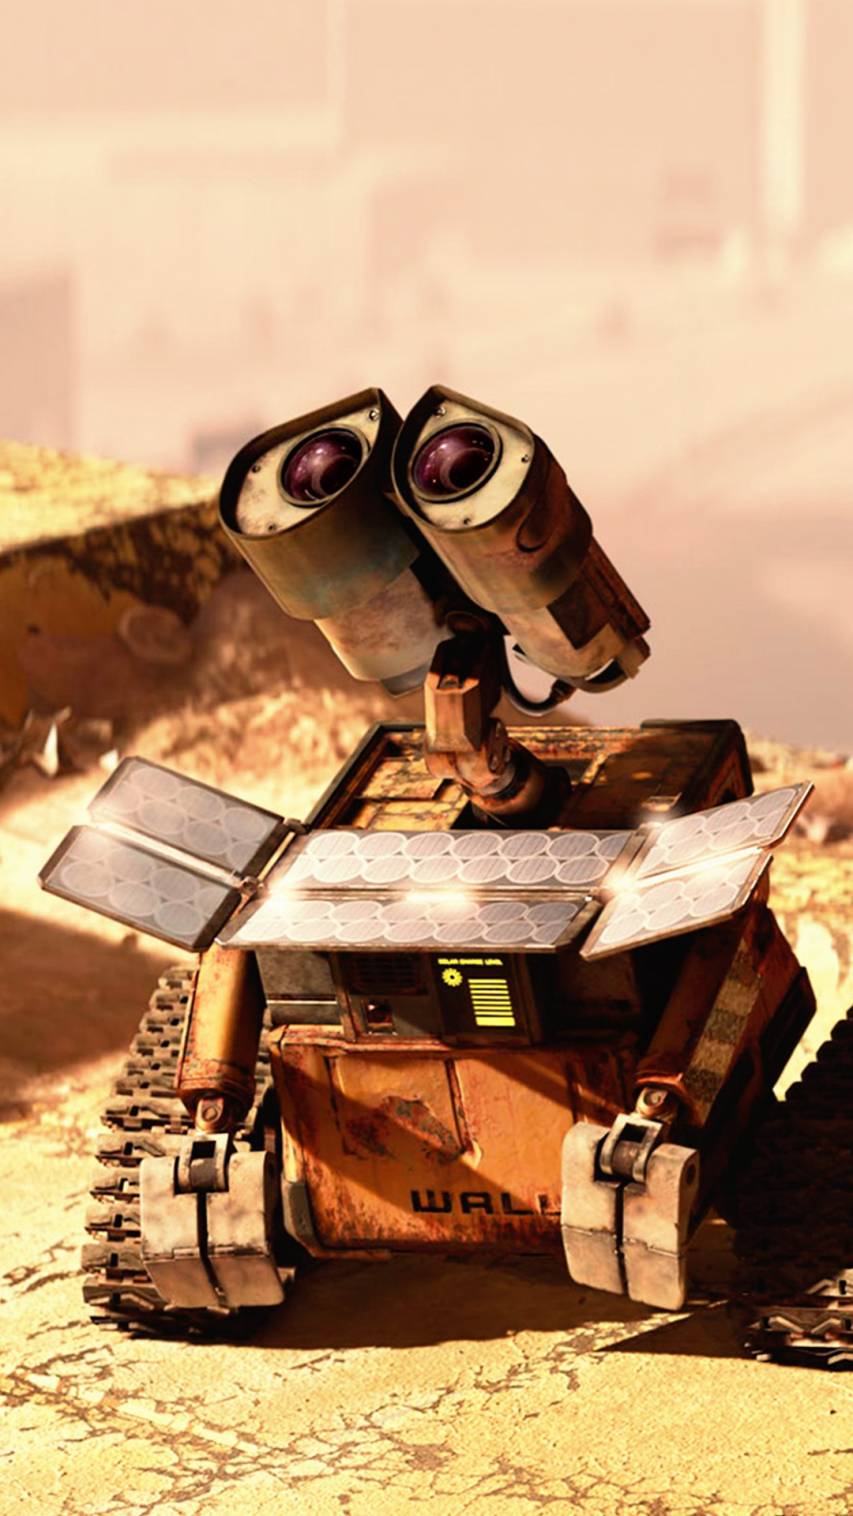 Wall e iPhone Wallpapers